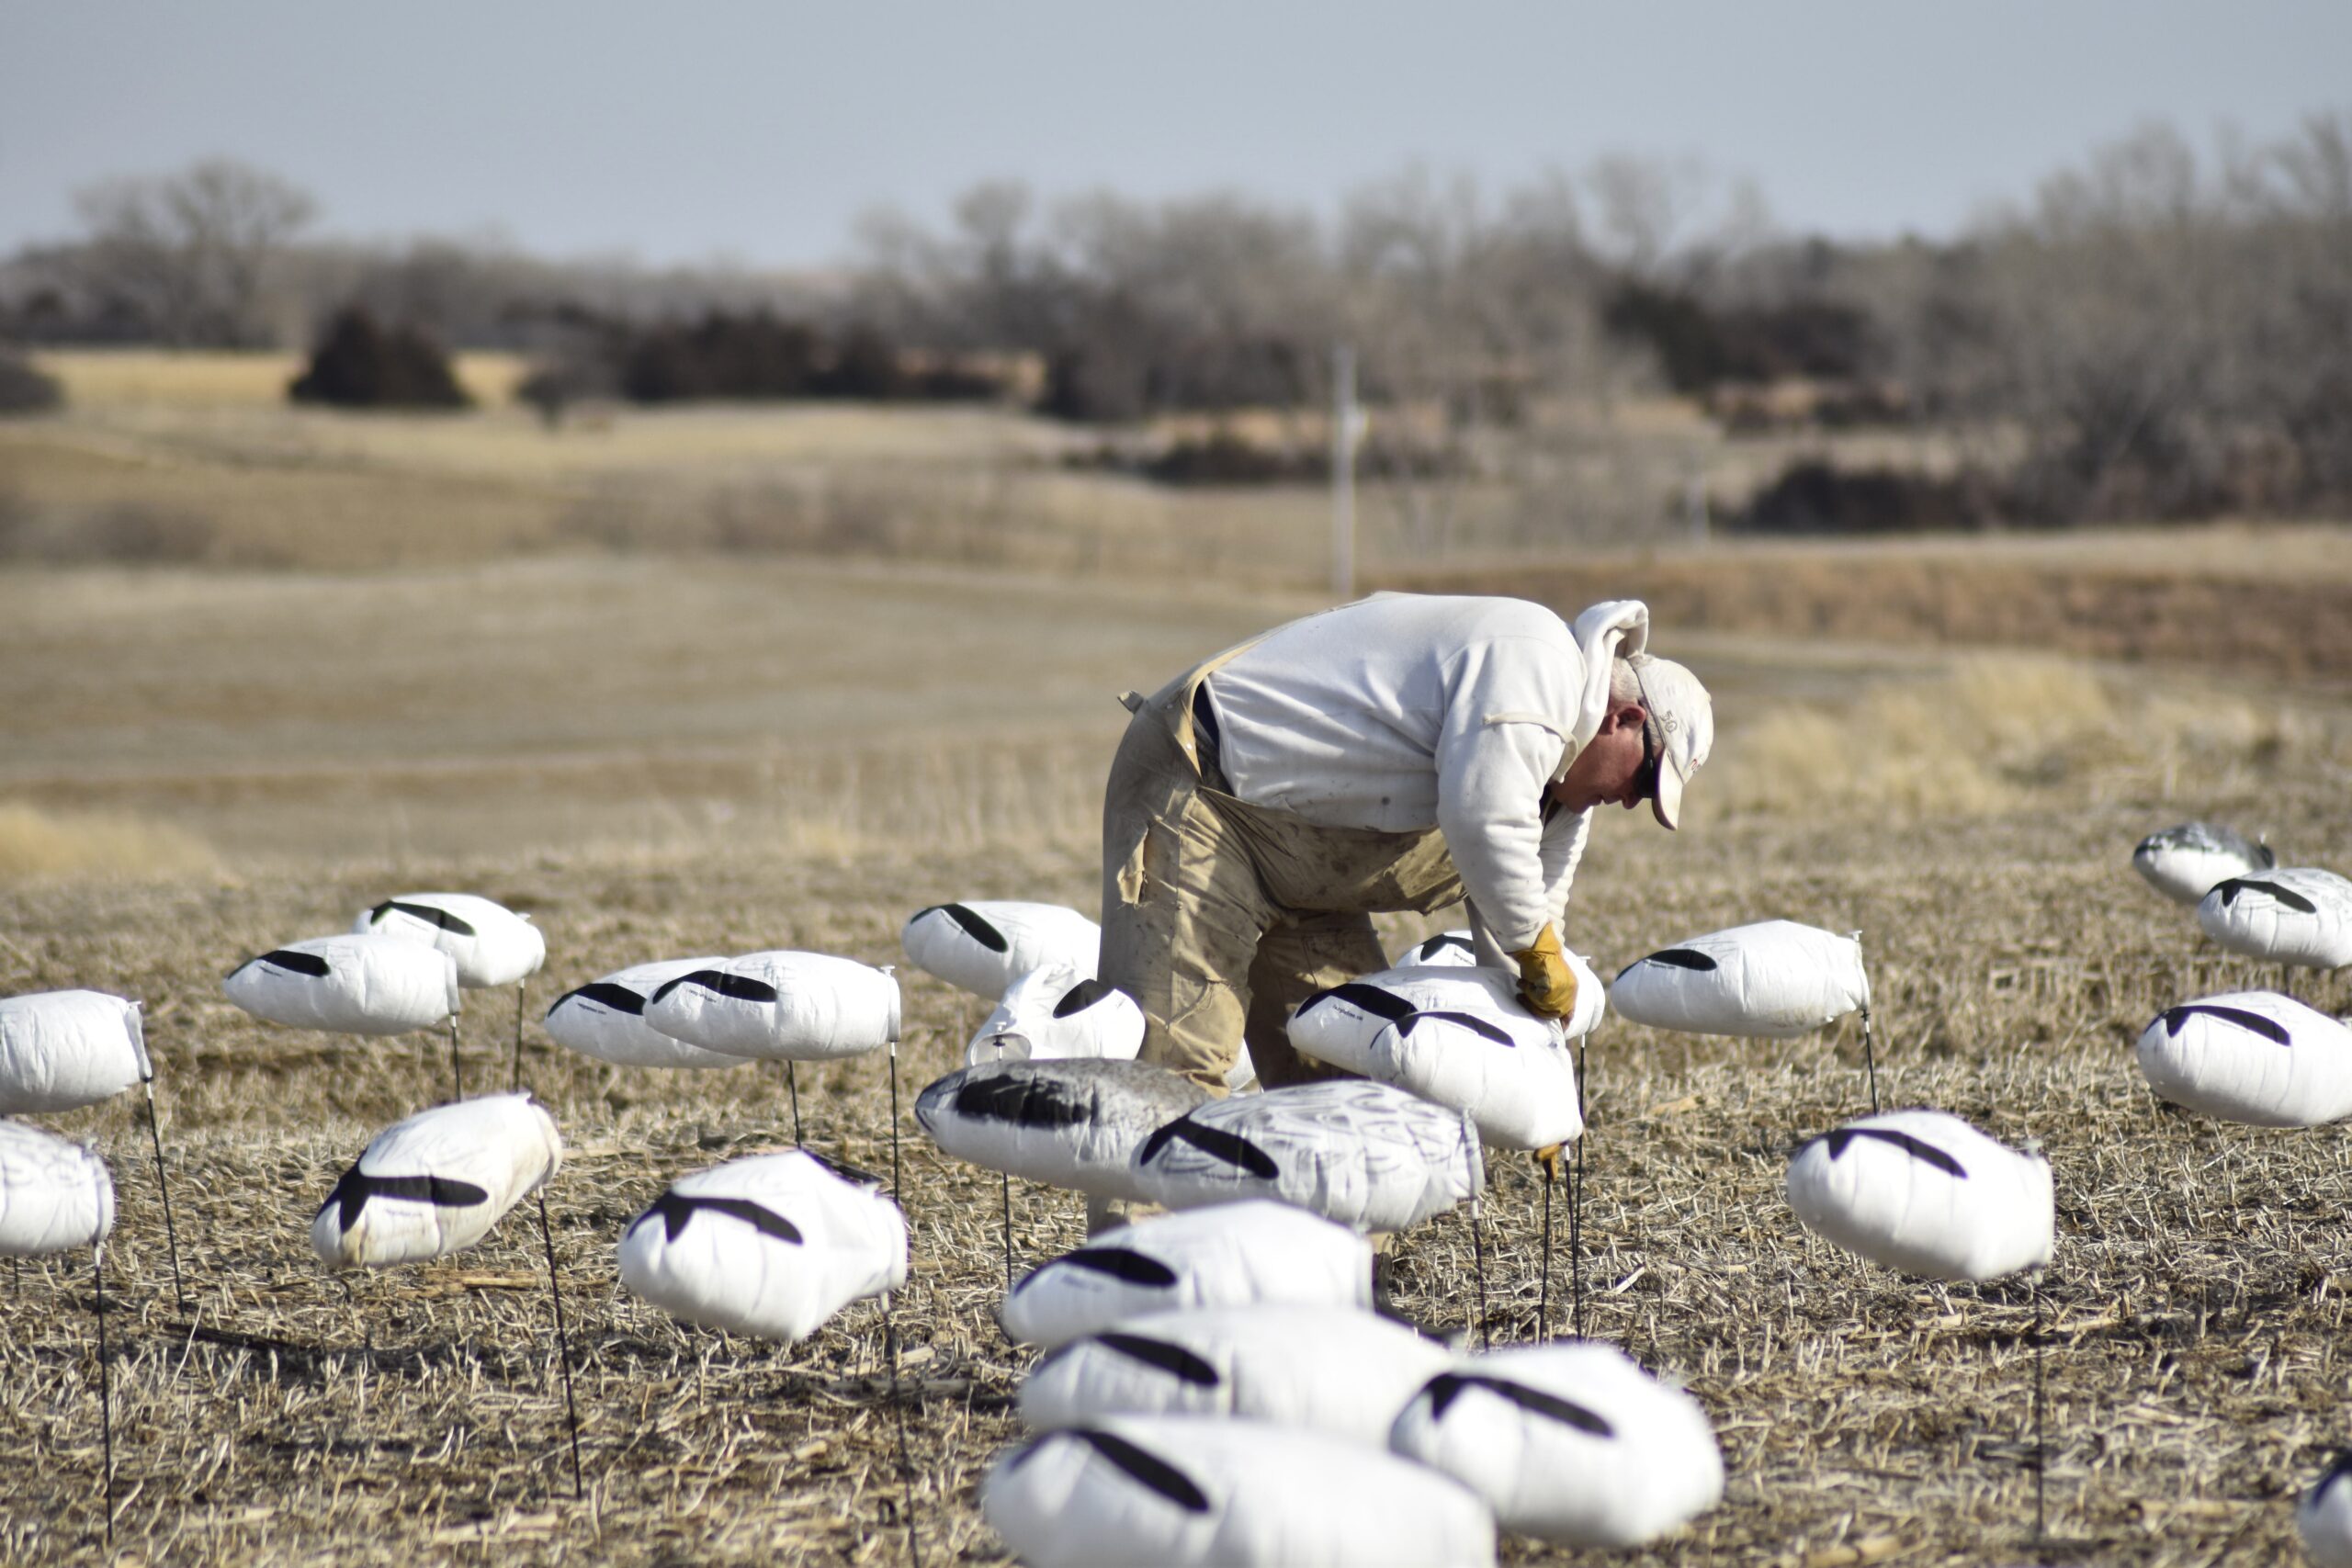 Bring some extra shotshells if you are a snow goose guest.